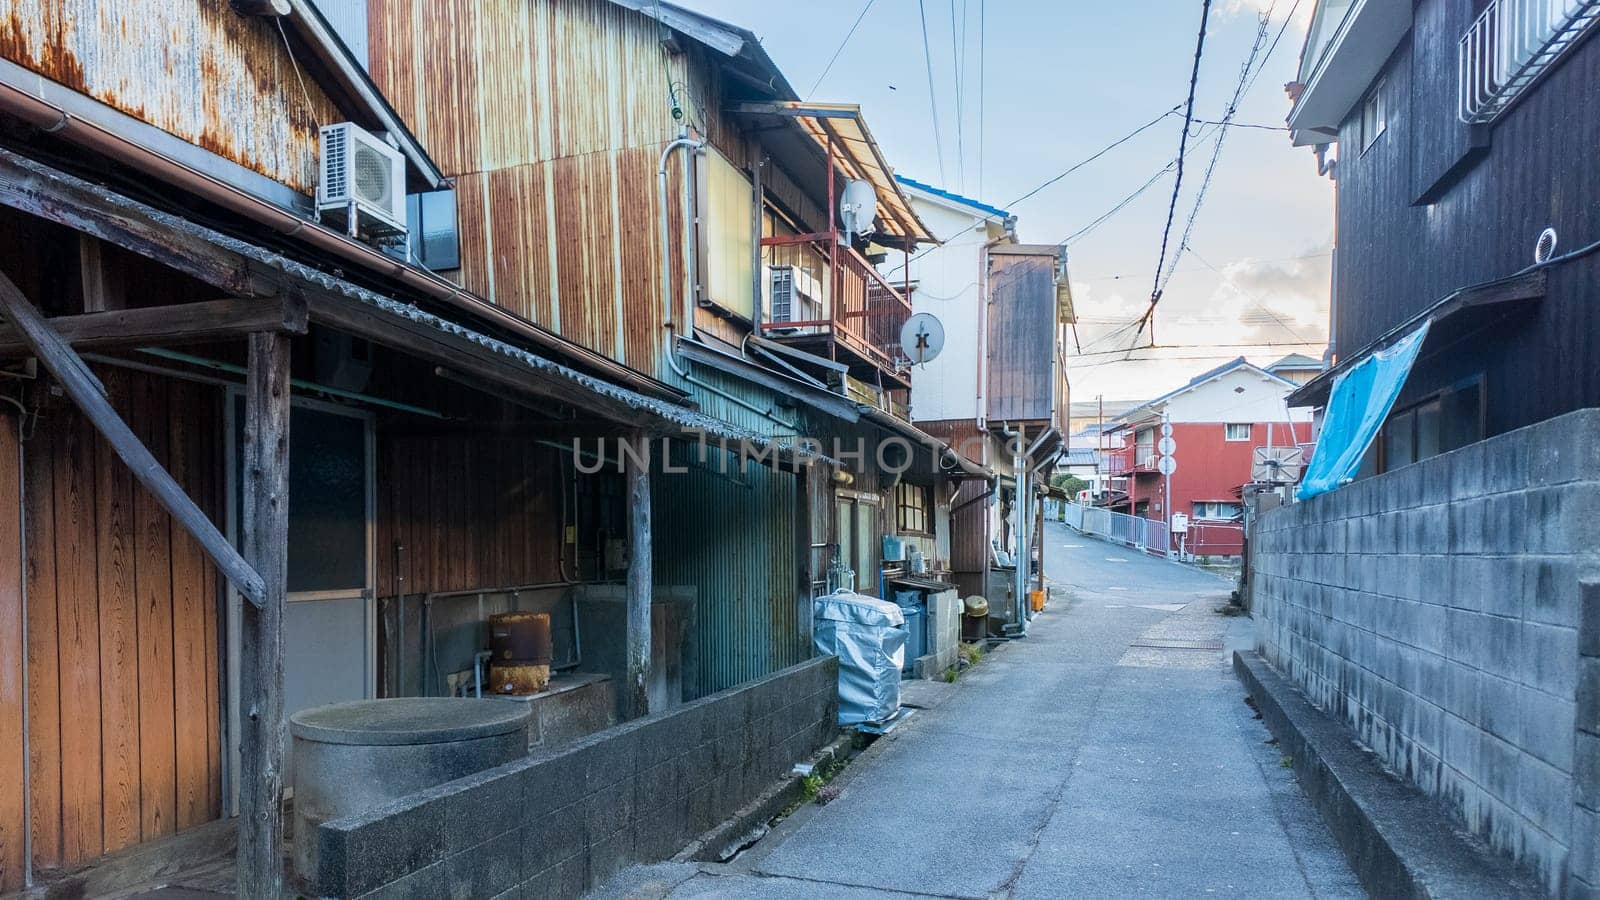 Narrow road between old houses in small town Japan by Osaze